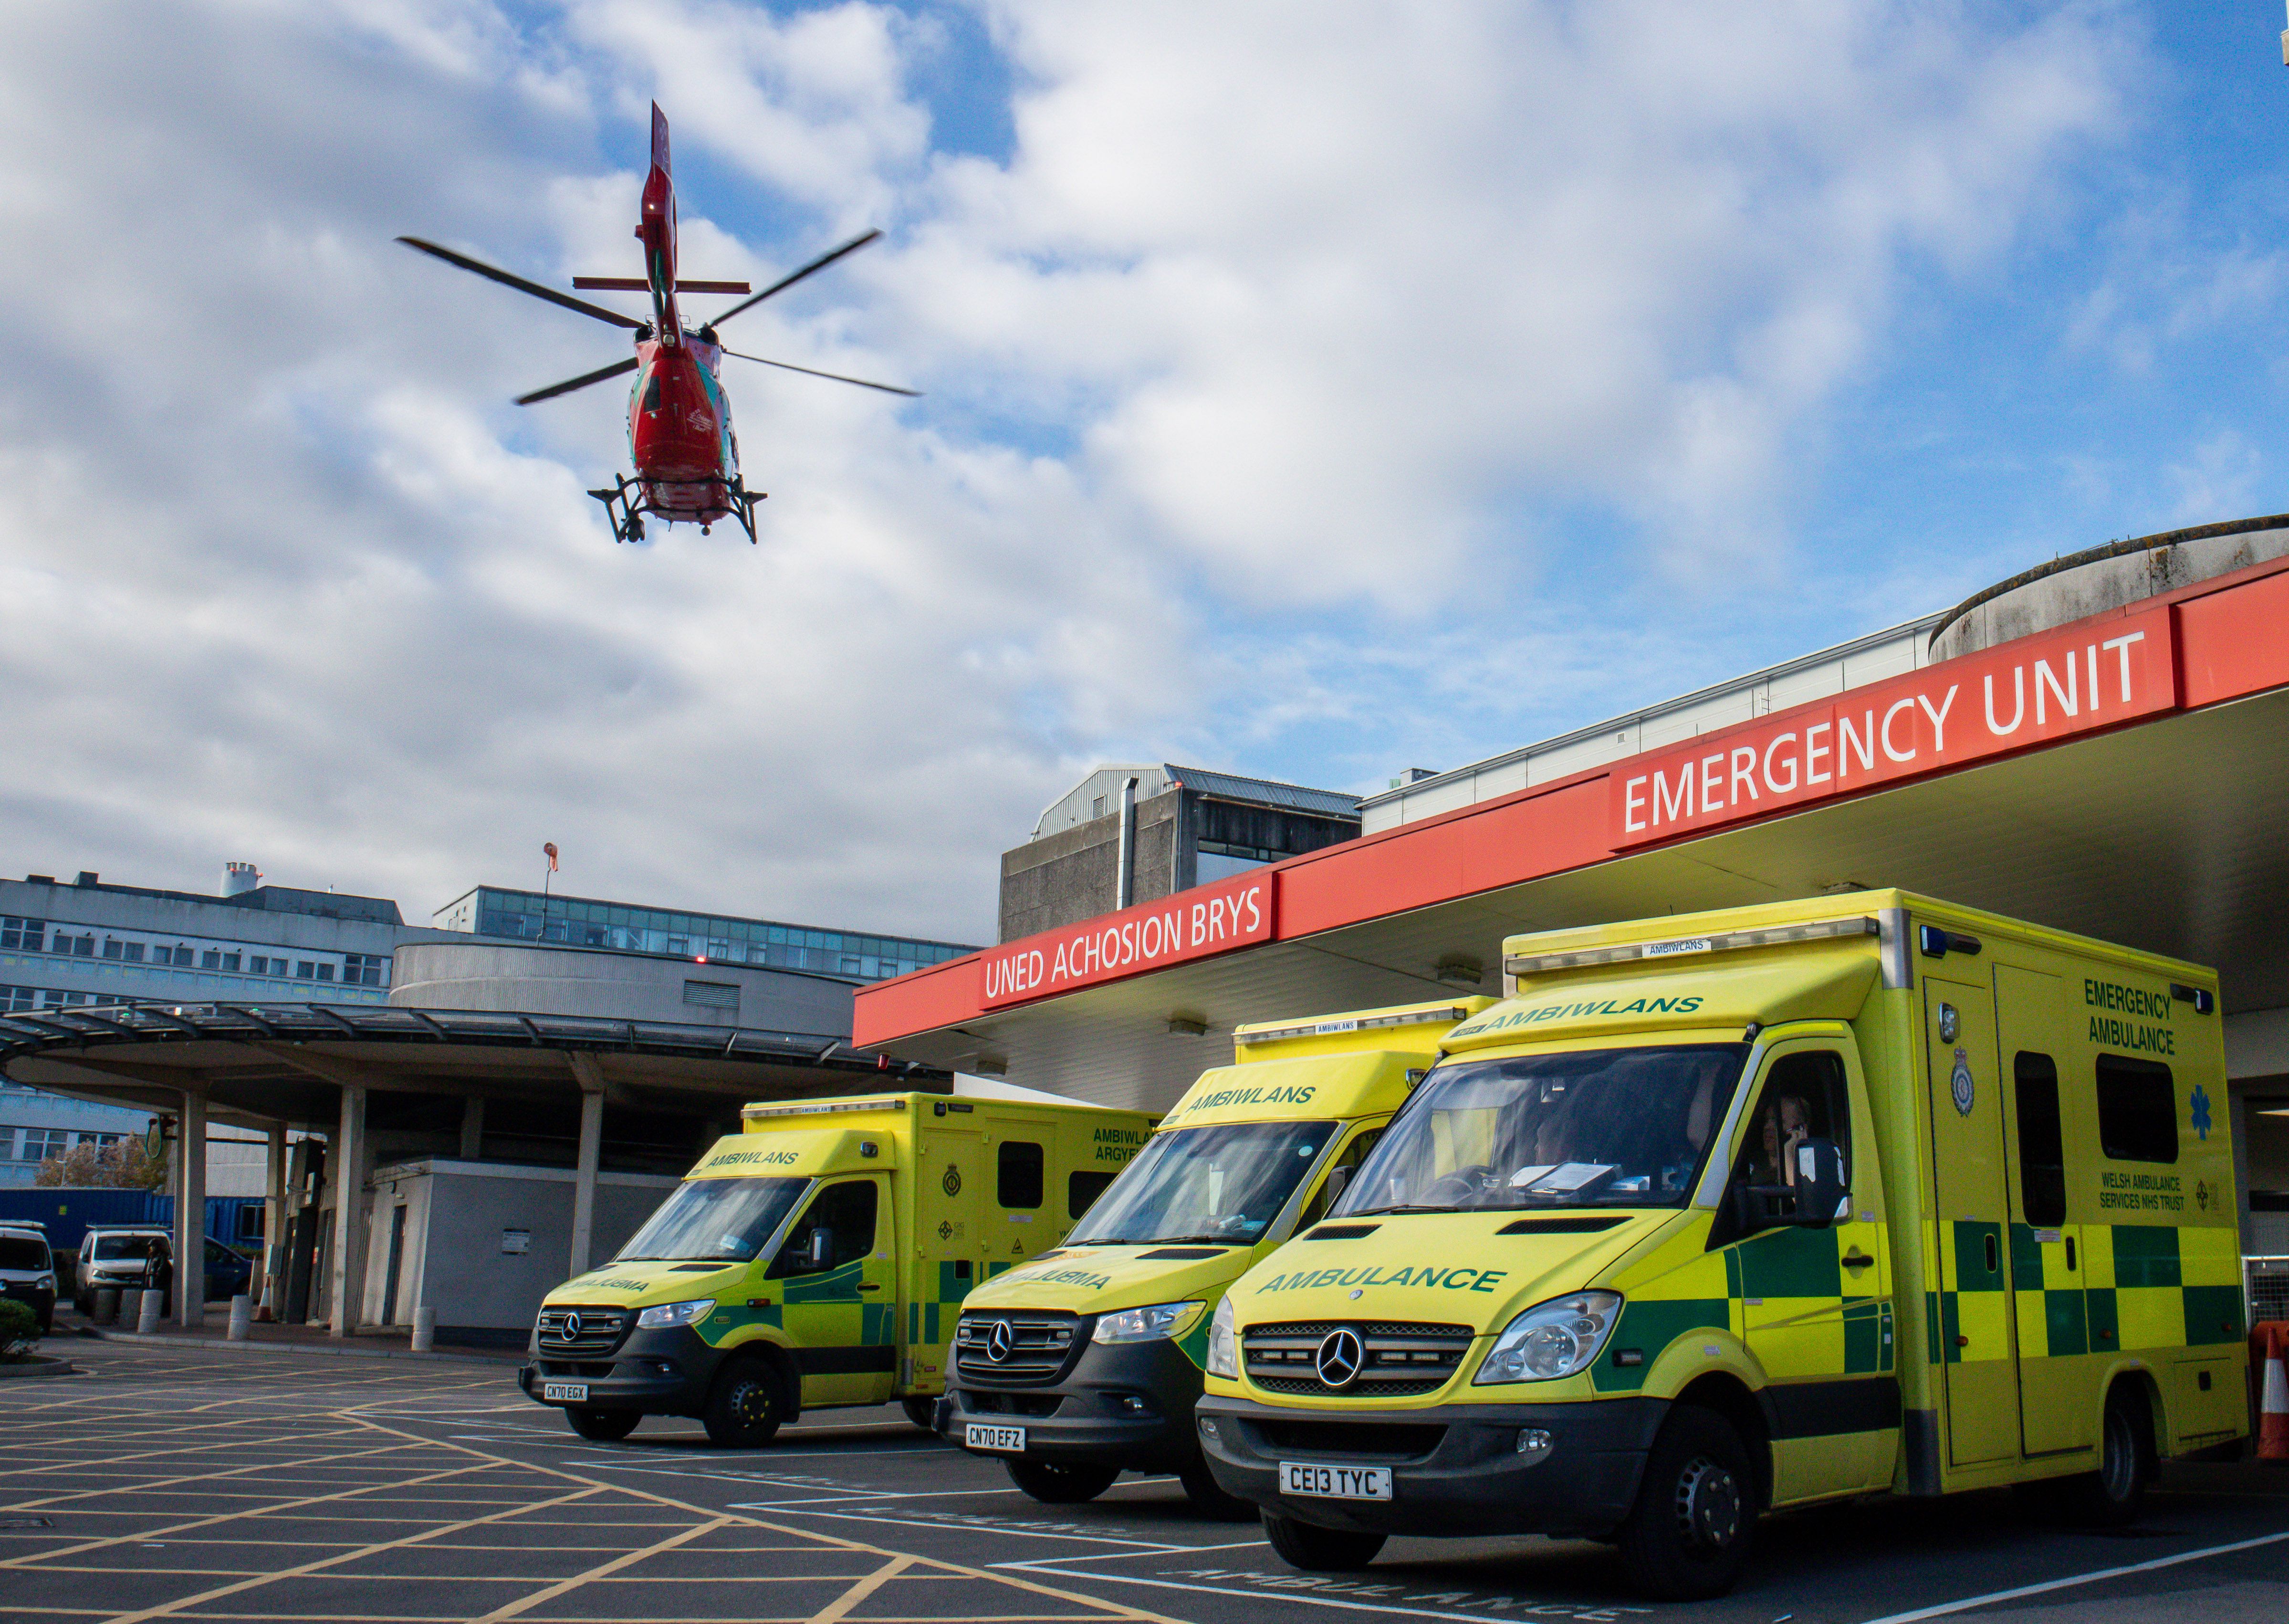 Girl was taken by Welsh Air Ambulance flying to the University Hospital of Wales